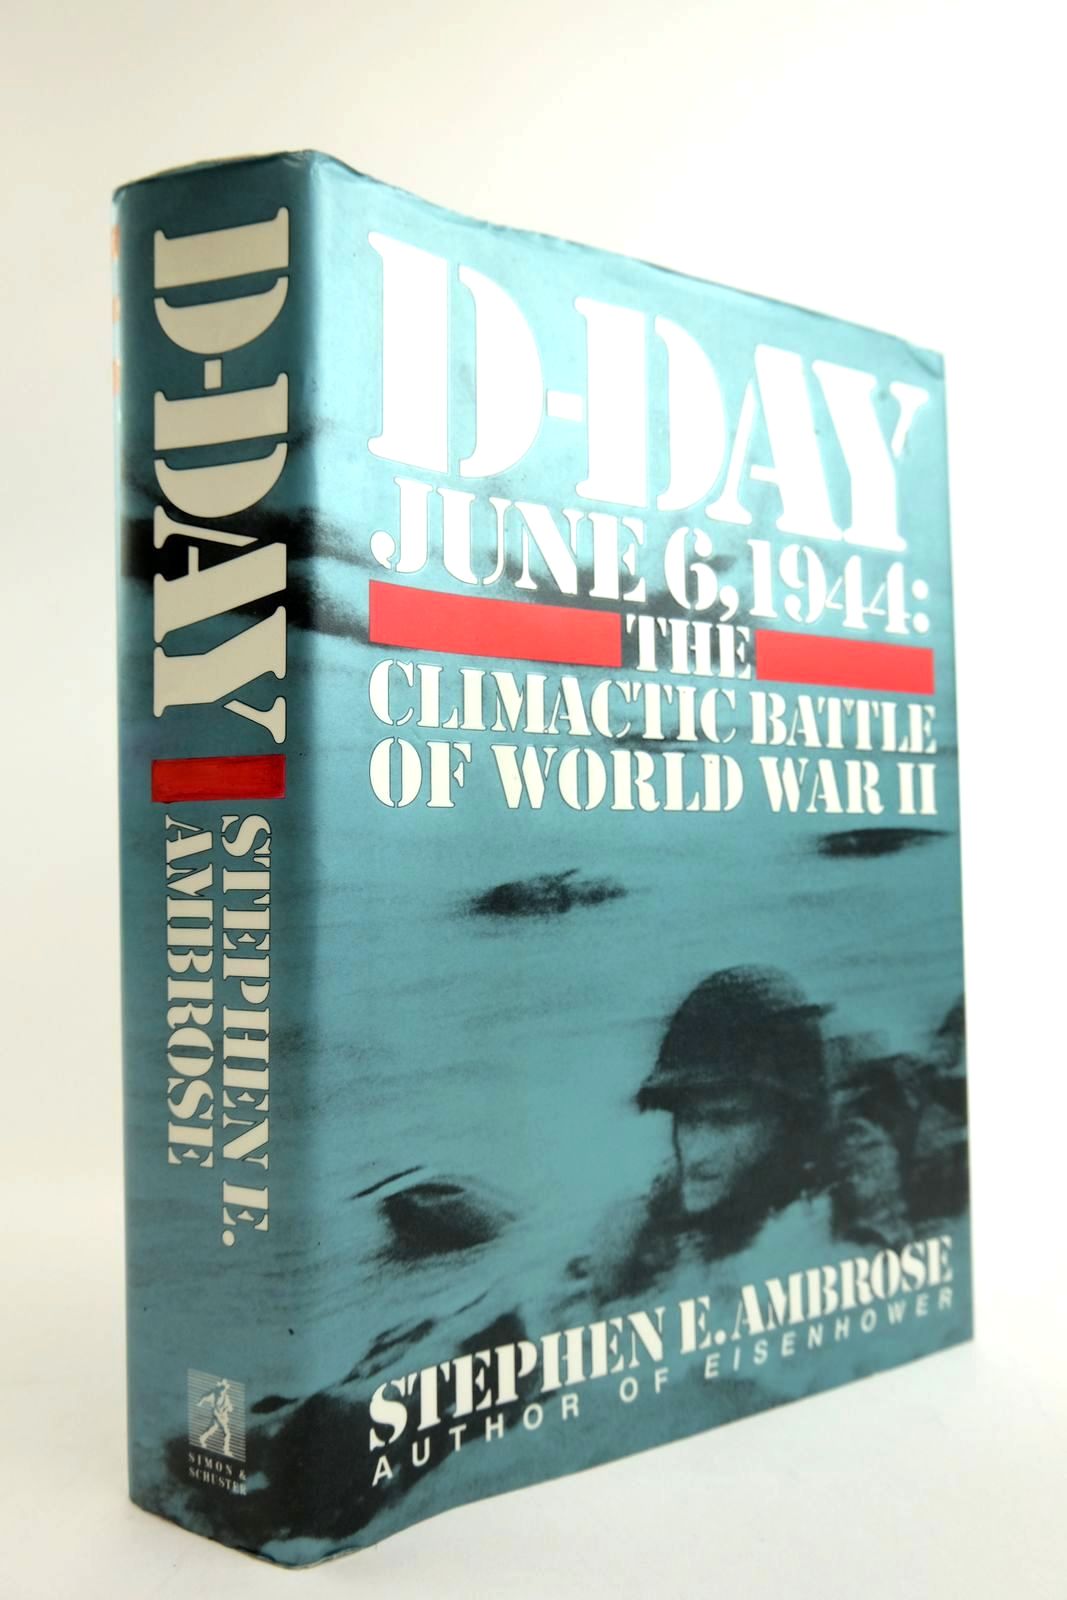 Photo of D-DAY JUNE 6, 1944: THE CLIMACTIC BATTLE OF WORLD WAR II written by Ambrose, Stephen E. published by Simon &amp; Schuster (STOCK CODE: 2133433)  for sale by Stella & Rose's Books